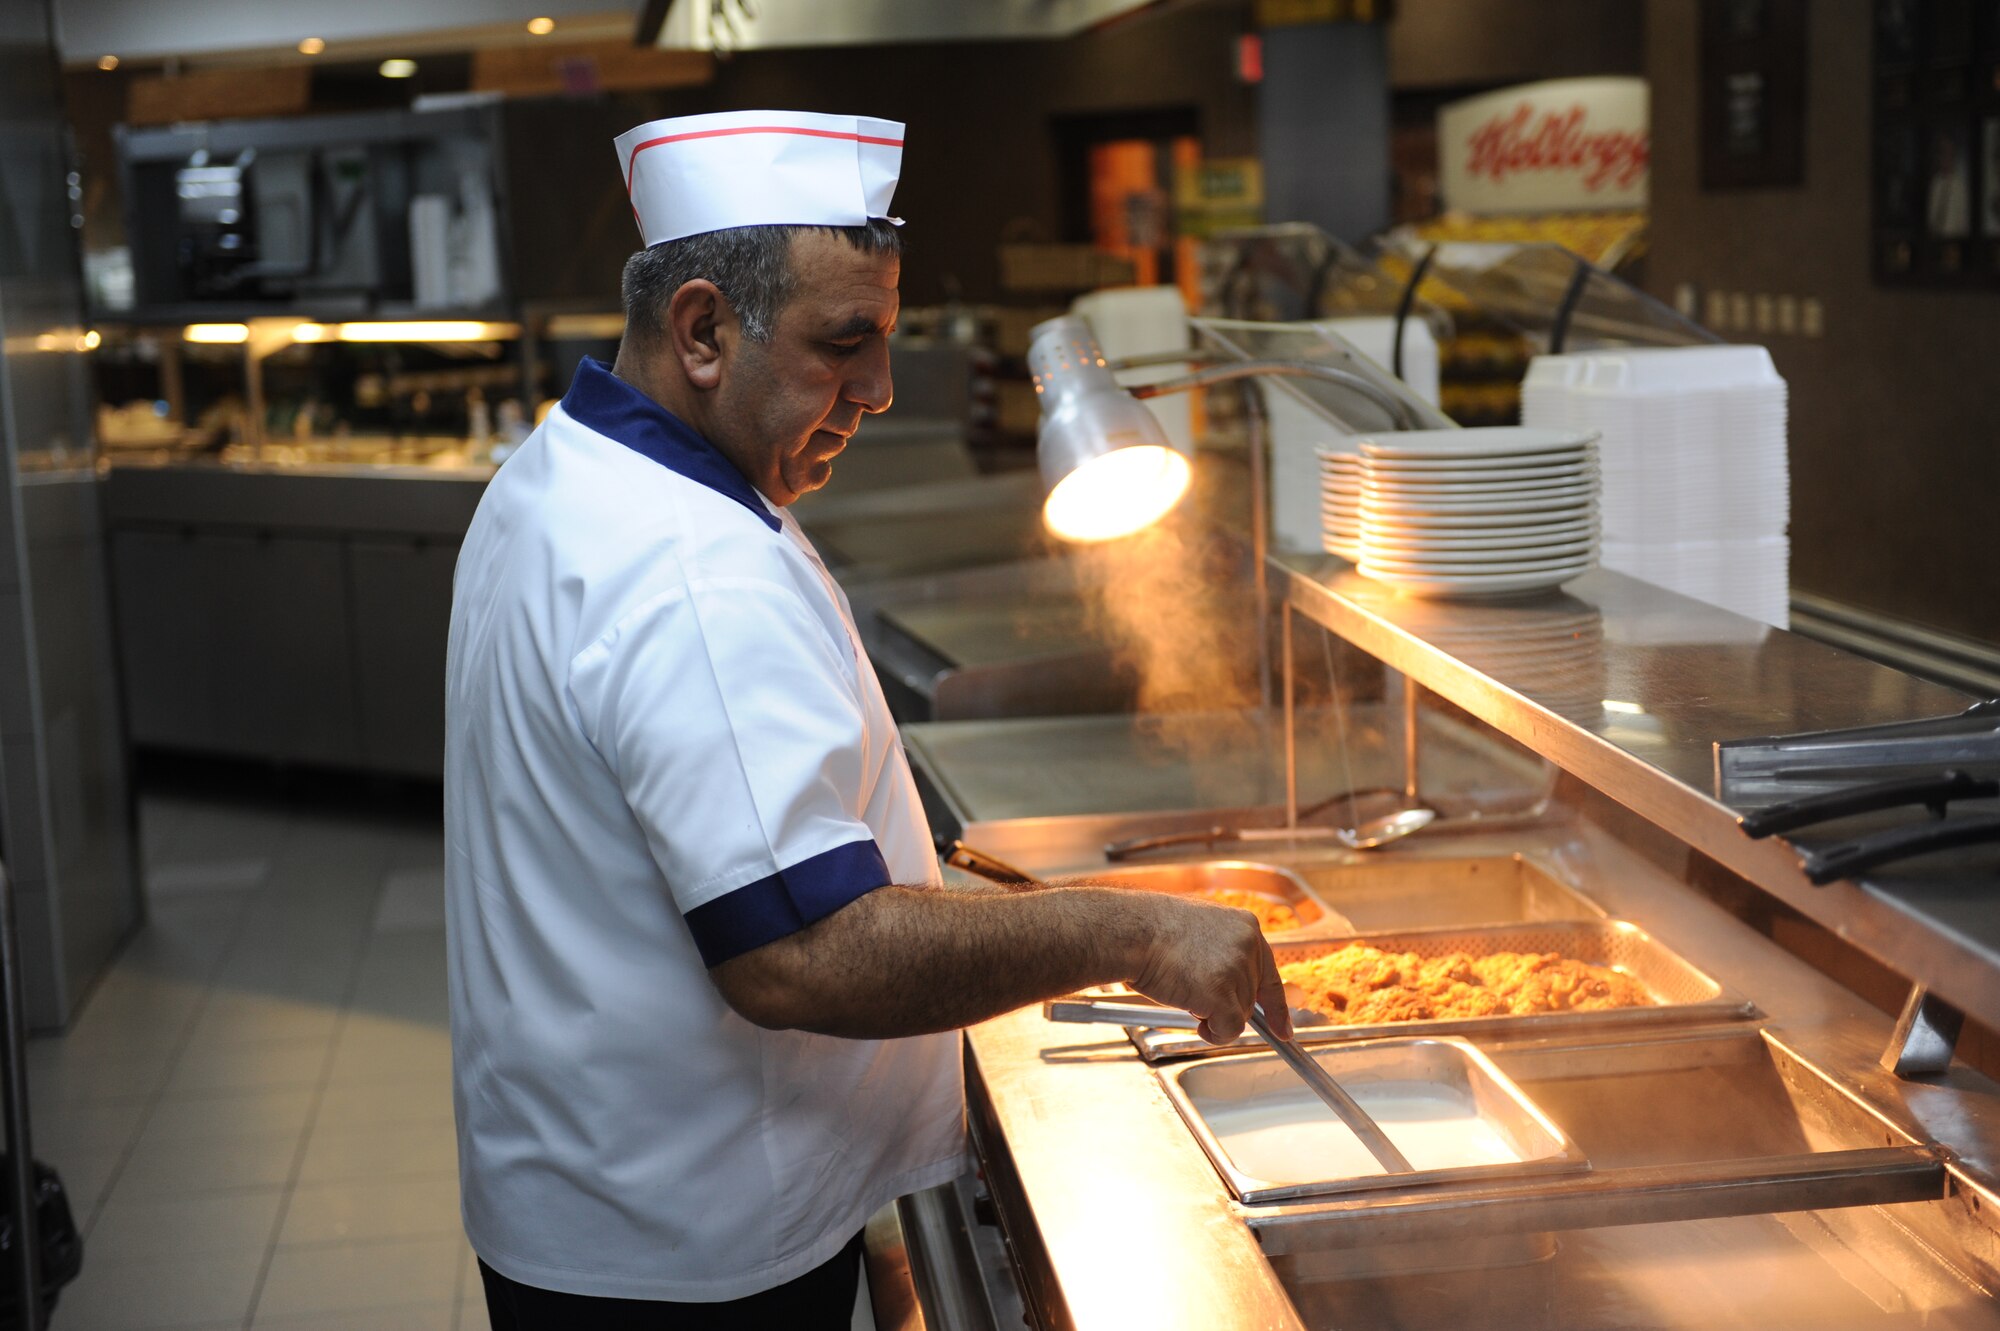 Osman Sendag, 39th Force Support Squadron apprentice cook, makes final preparations prior to the dining facility opening for lunch July 27, 2012 at the  Sultan's Inn Dining Facility at Incirlik Air Base, Turkey. The facility offers a main line, short order line, and a variety of made-to-order foods such as sandwiches and  chicken at lunch.(U.S. Air Force photo by Senior Airman William A. O'Brien/Released) 